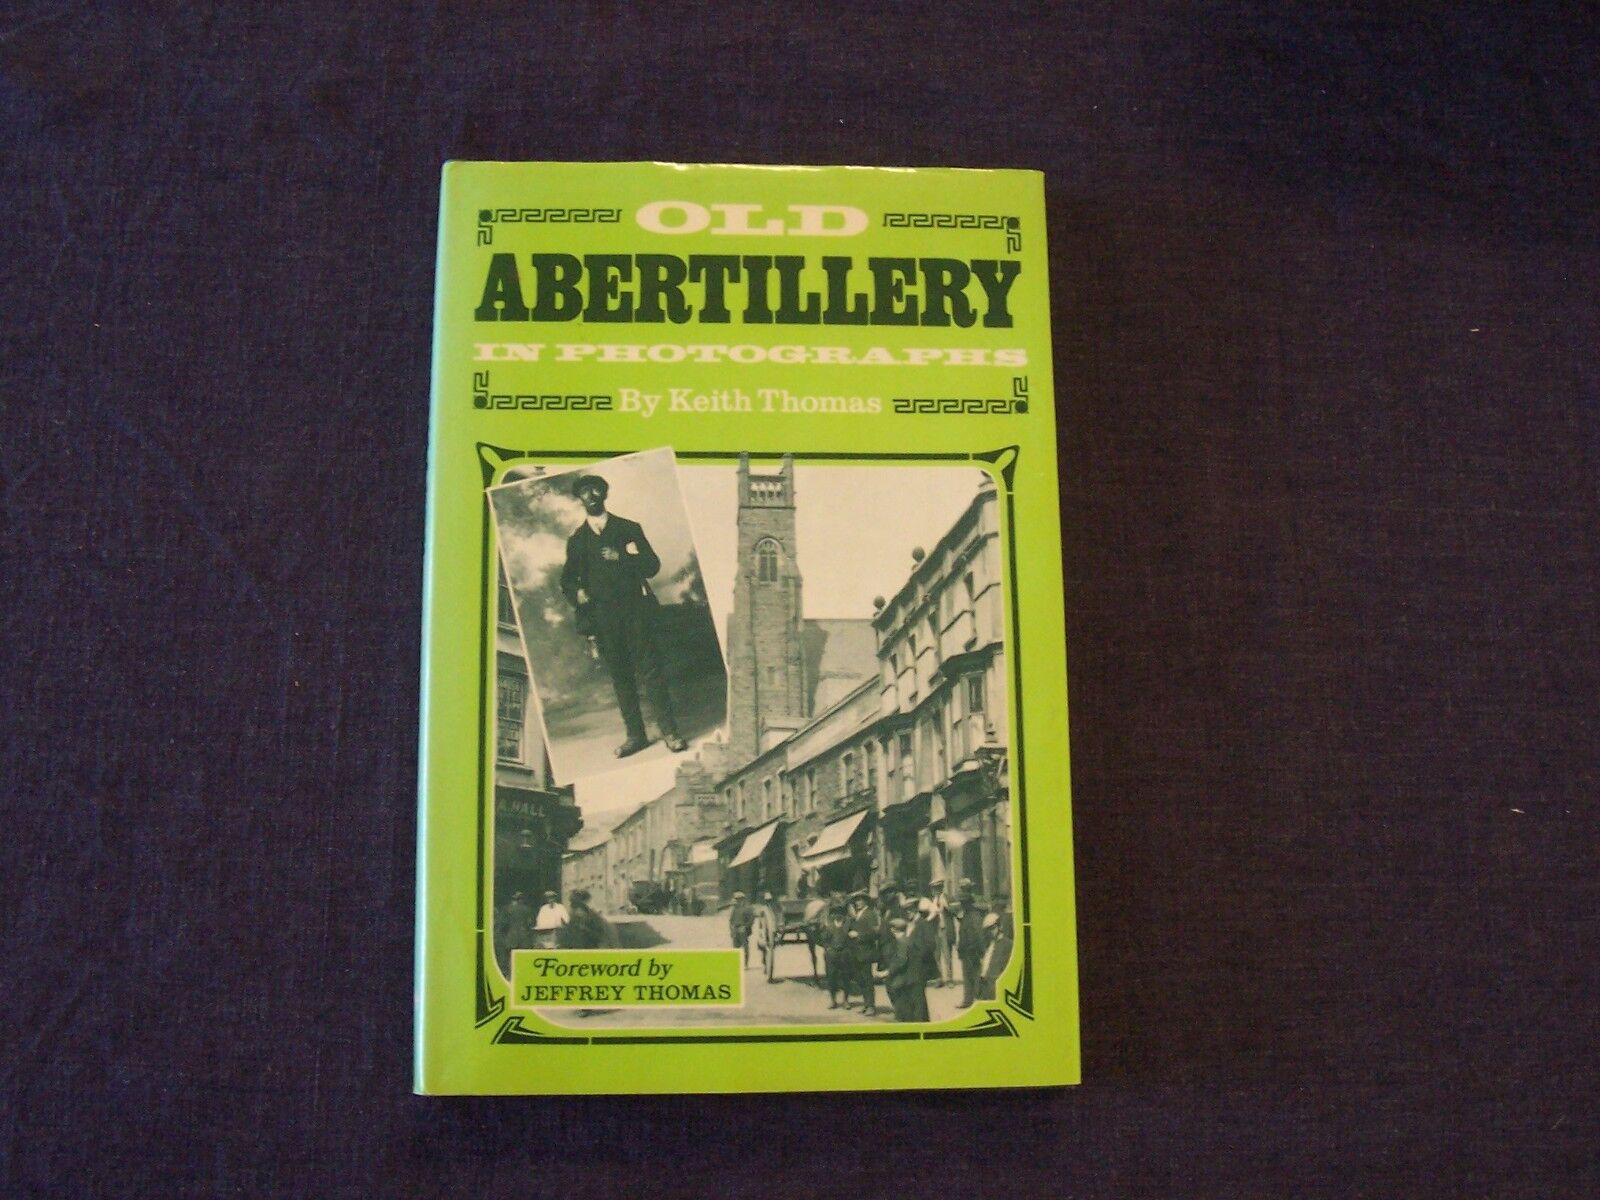 author signed historical book - Old Abertillery in Photographs by Keith Thomas